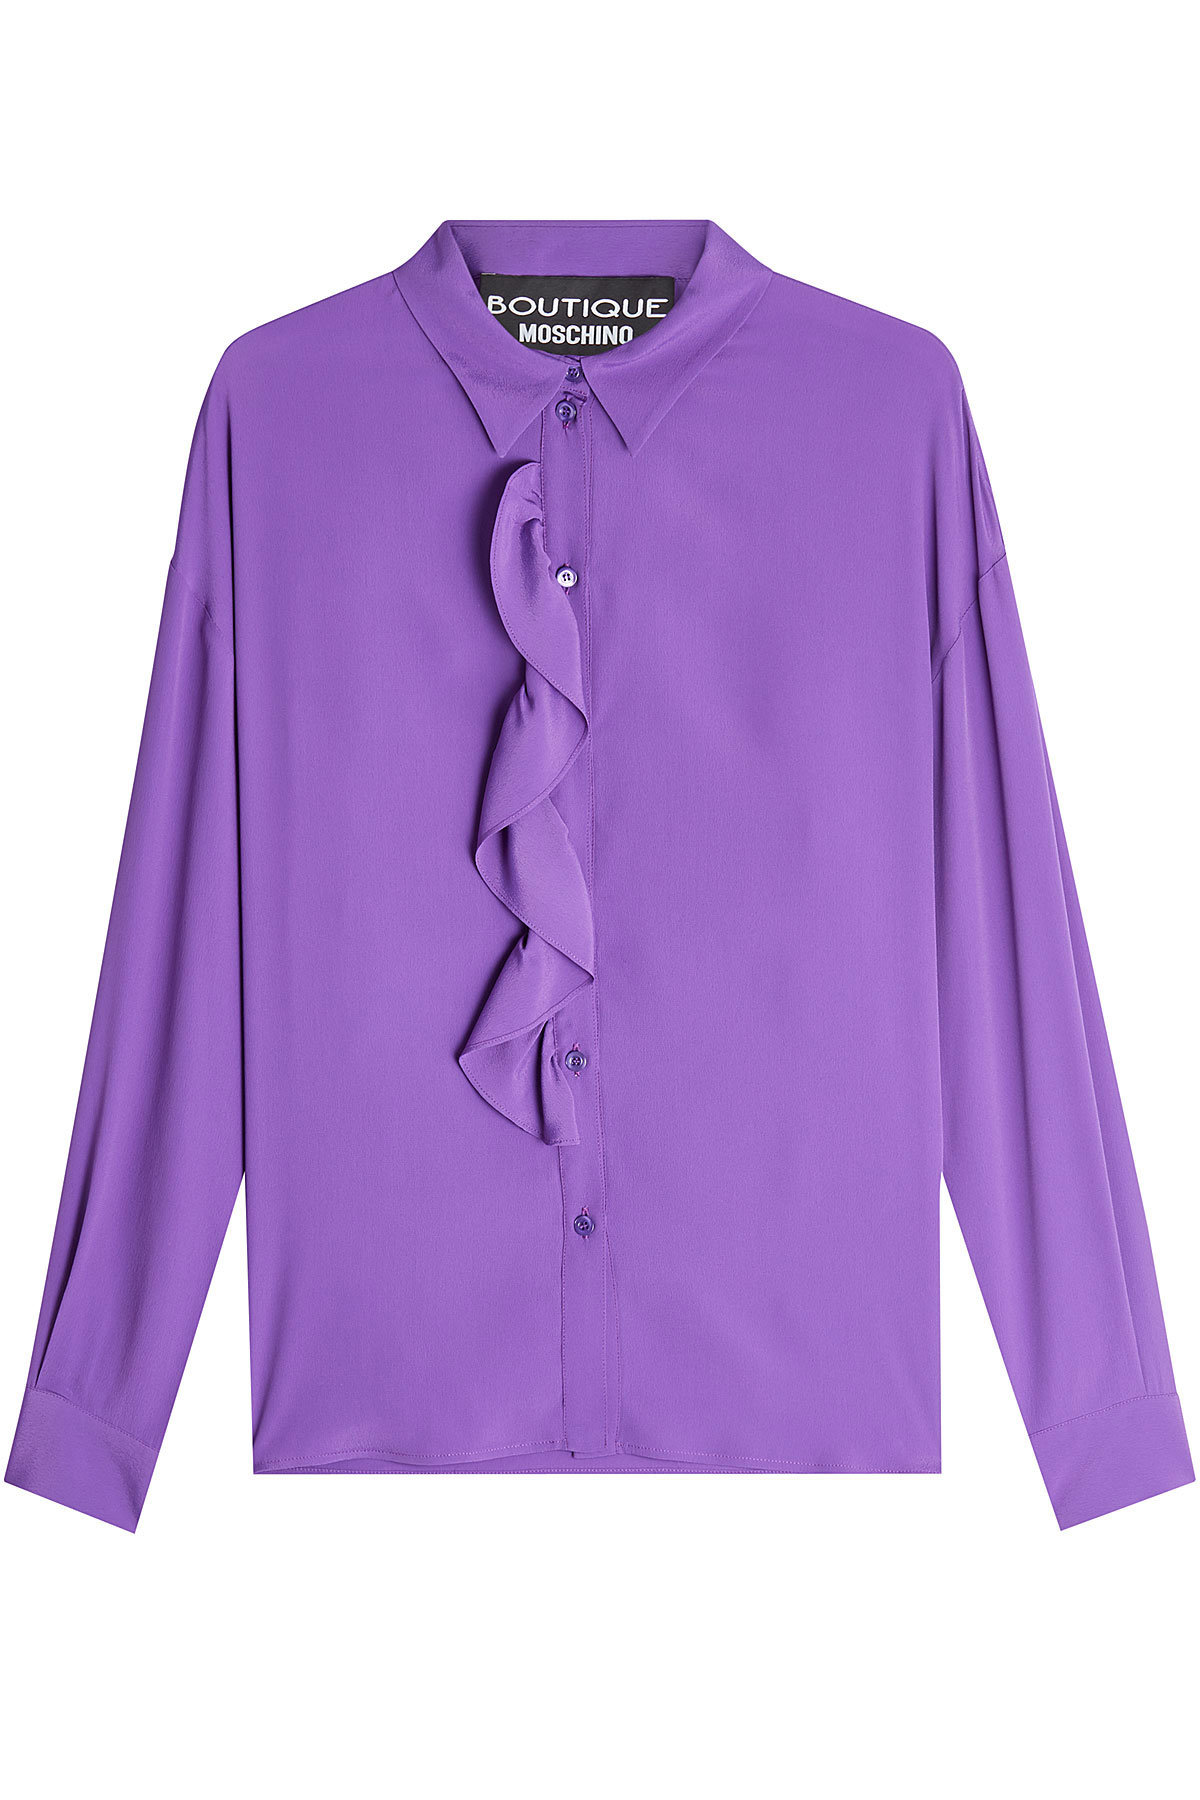 Boutique Moschino - Flutter Trim Blouse with Silk